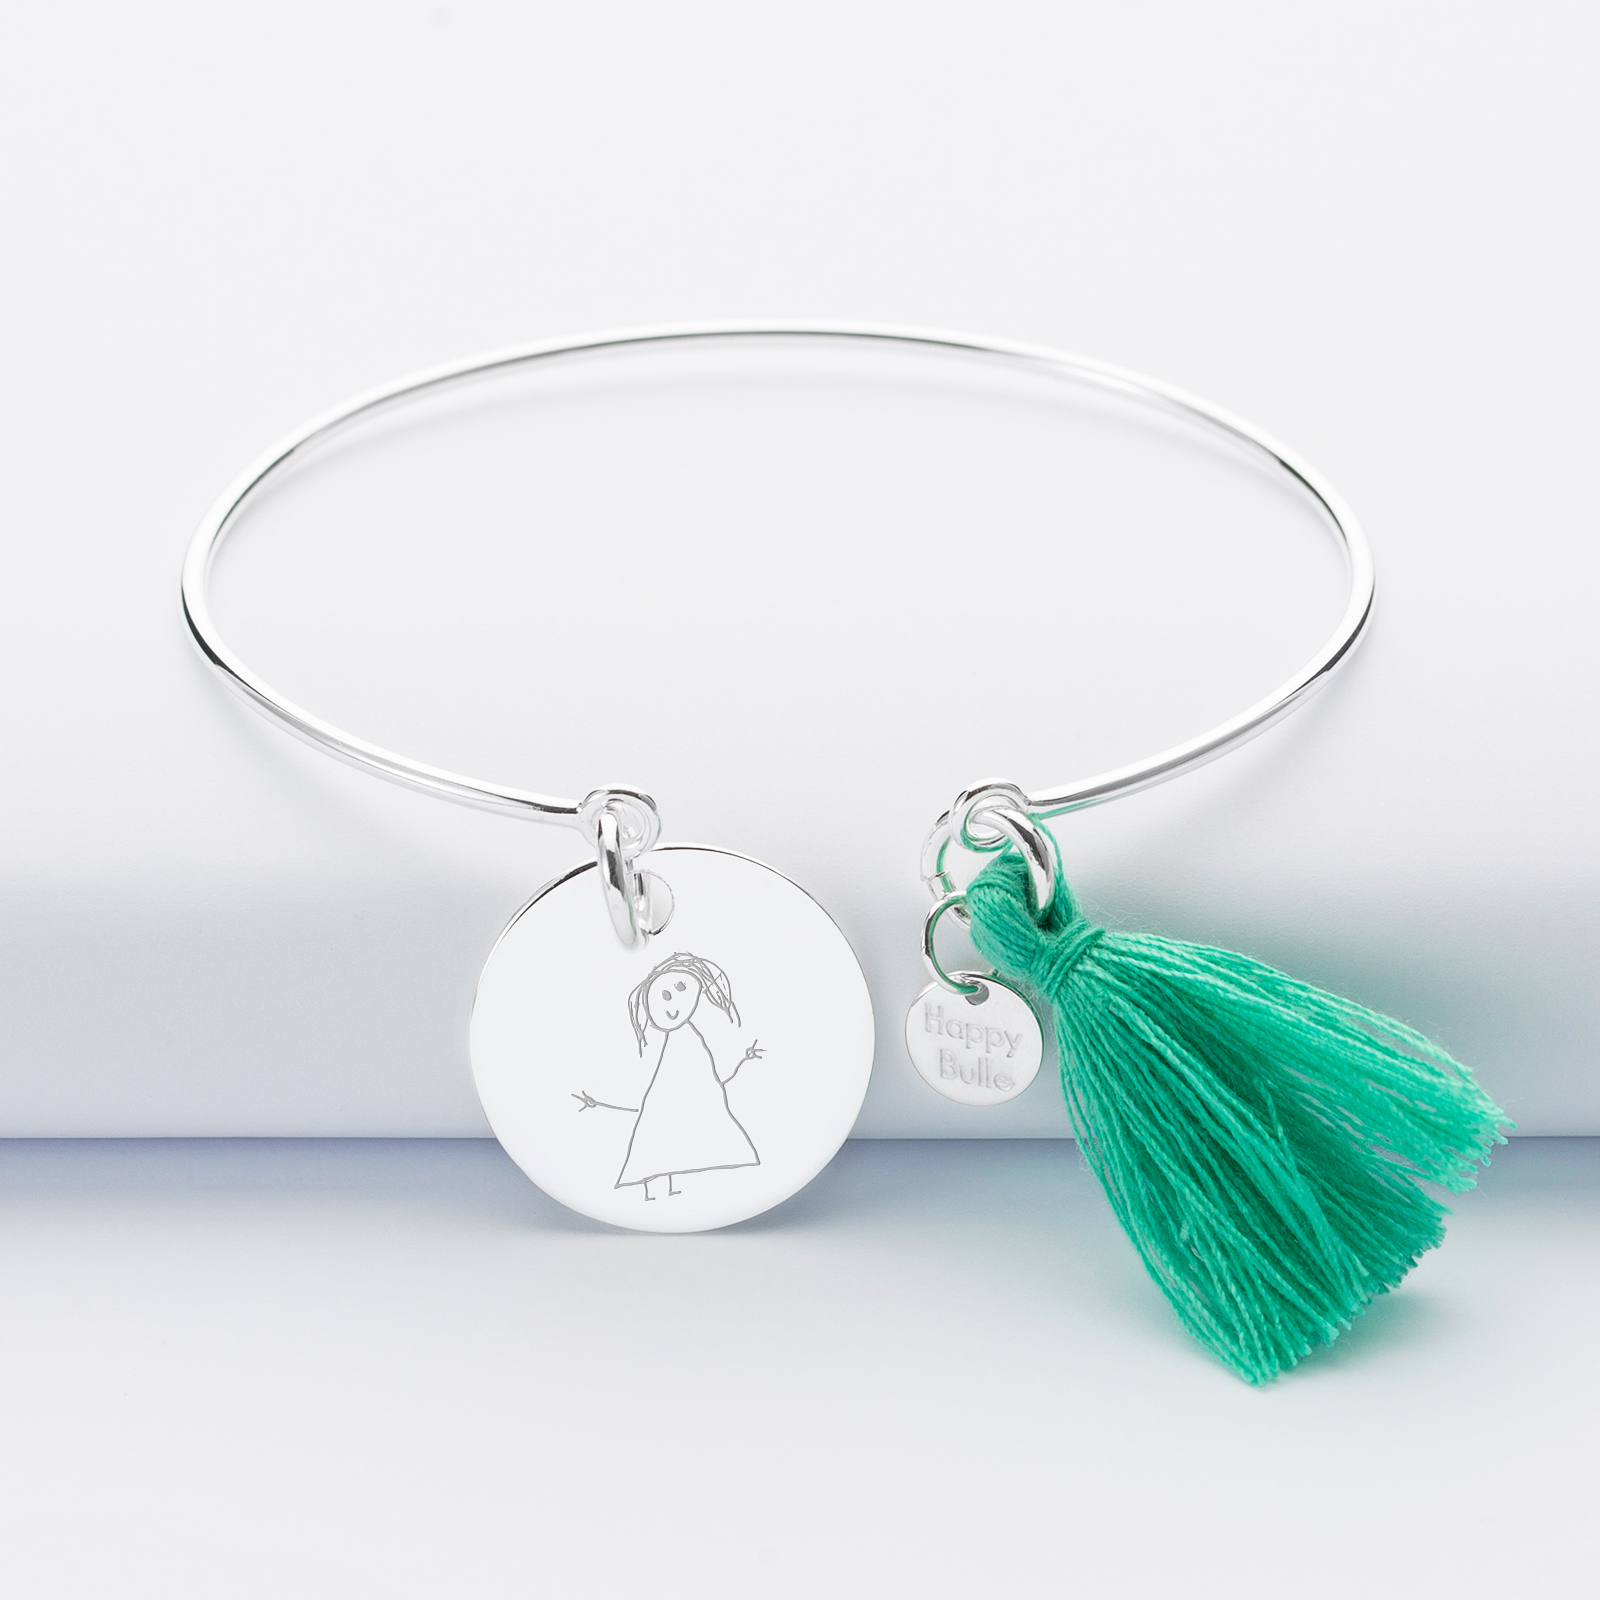 Personalised silver tassel bangle and 19 mm medallion sketch